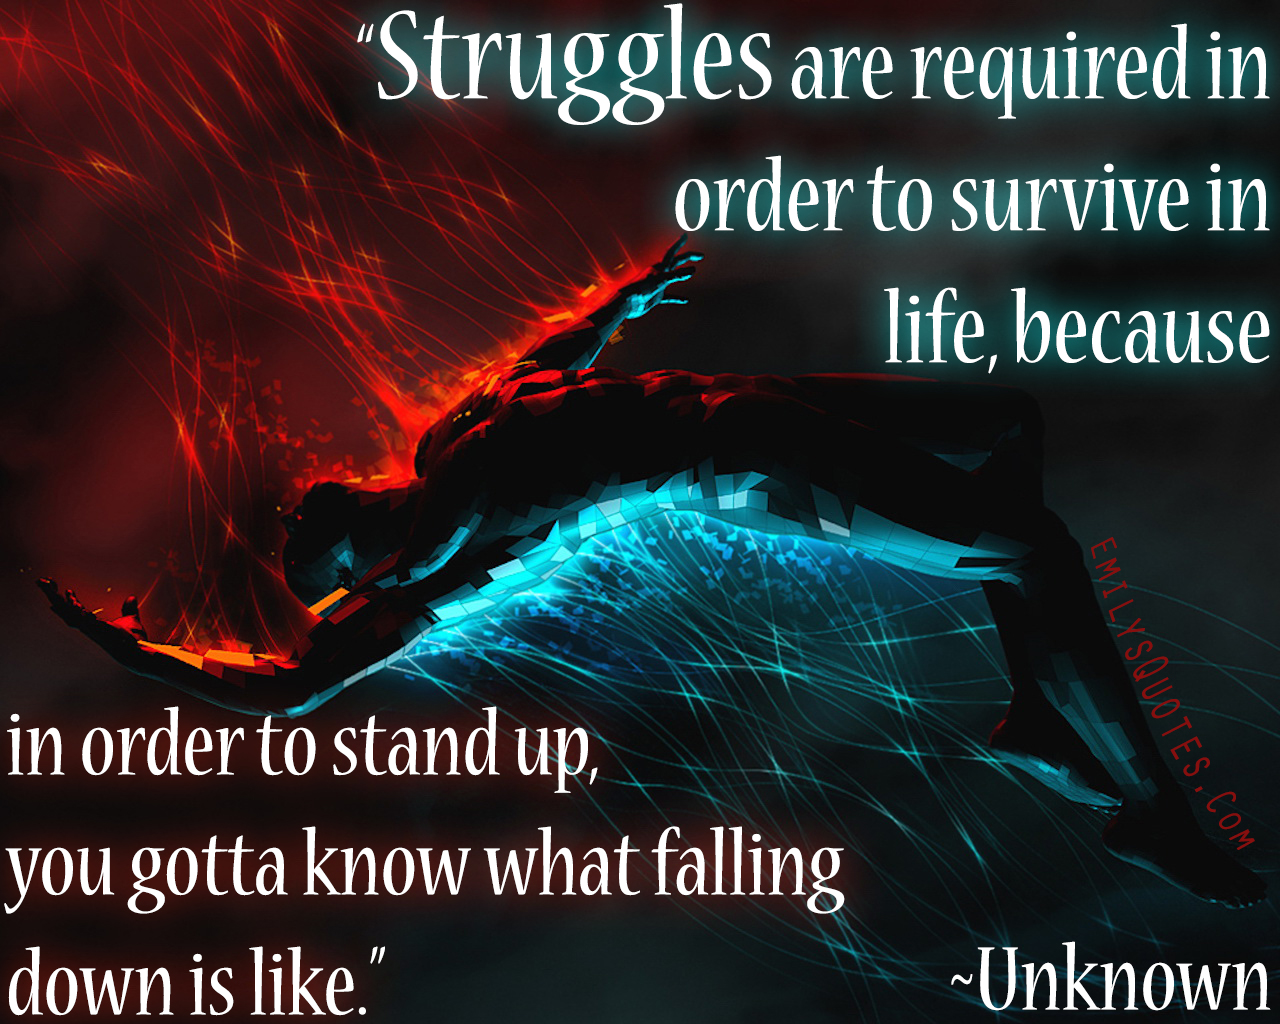 Struggles are required in order to survive in life; because in order to stand up, you gotta know what falling down is like